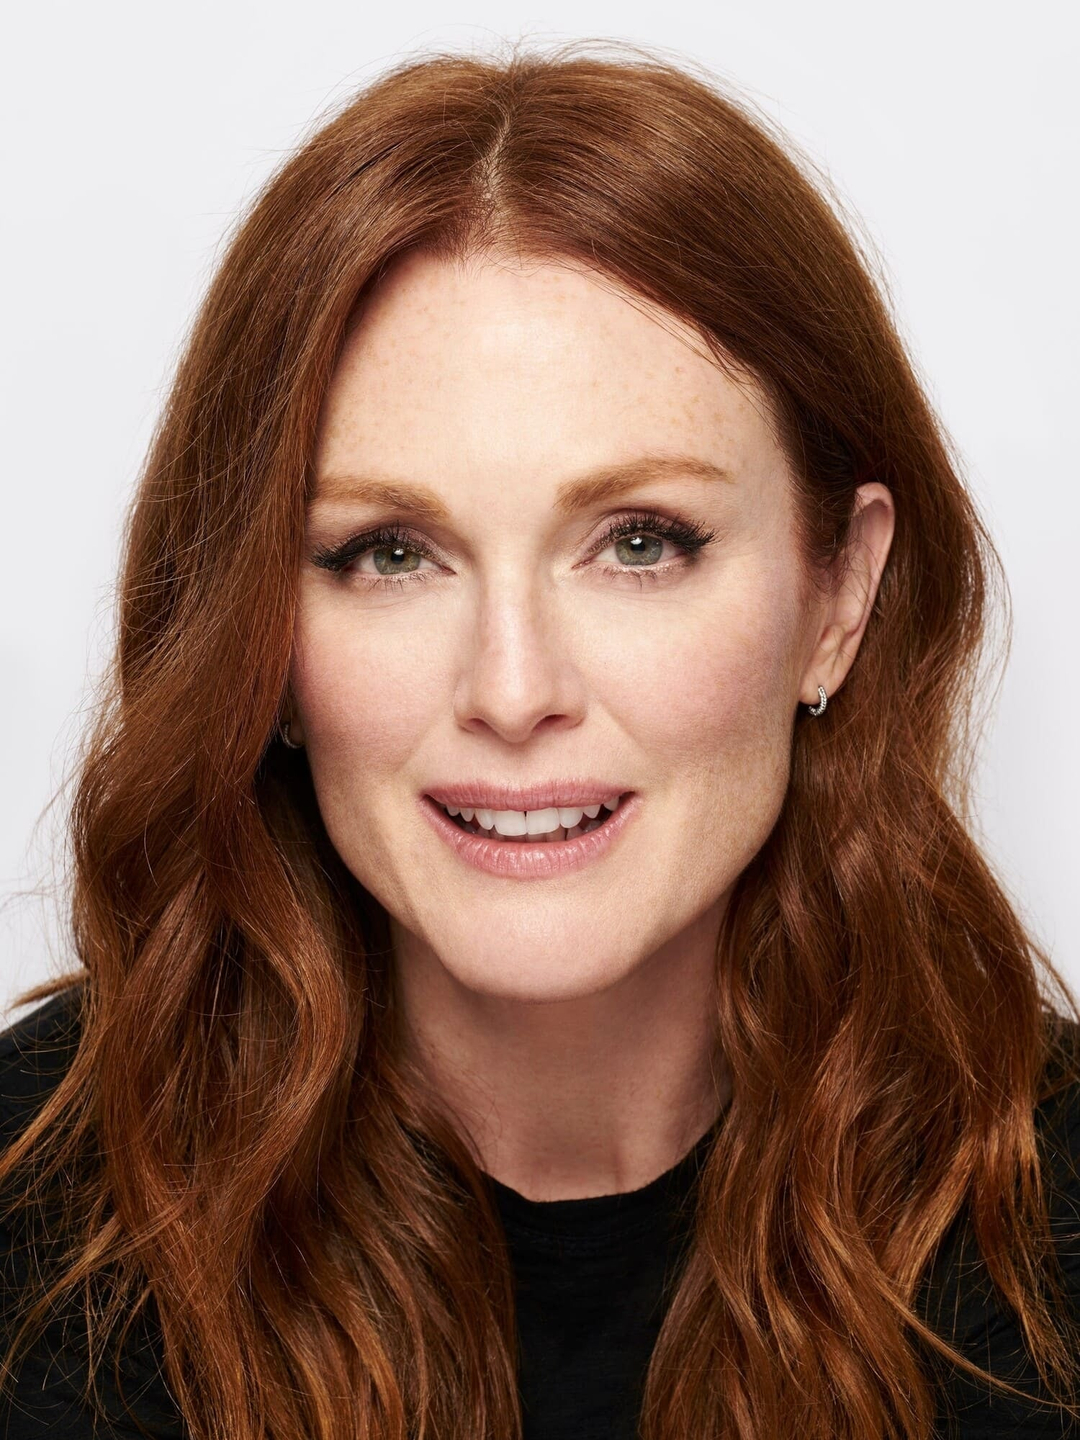 Julianne Moore who is her father